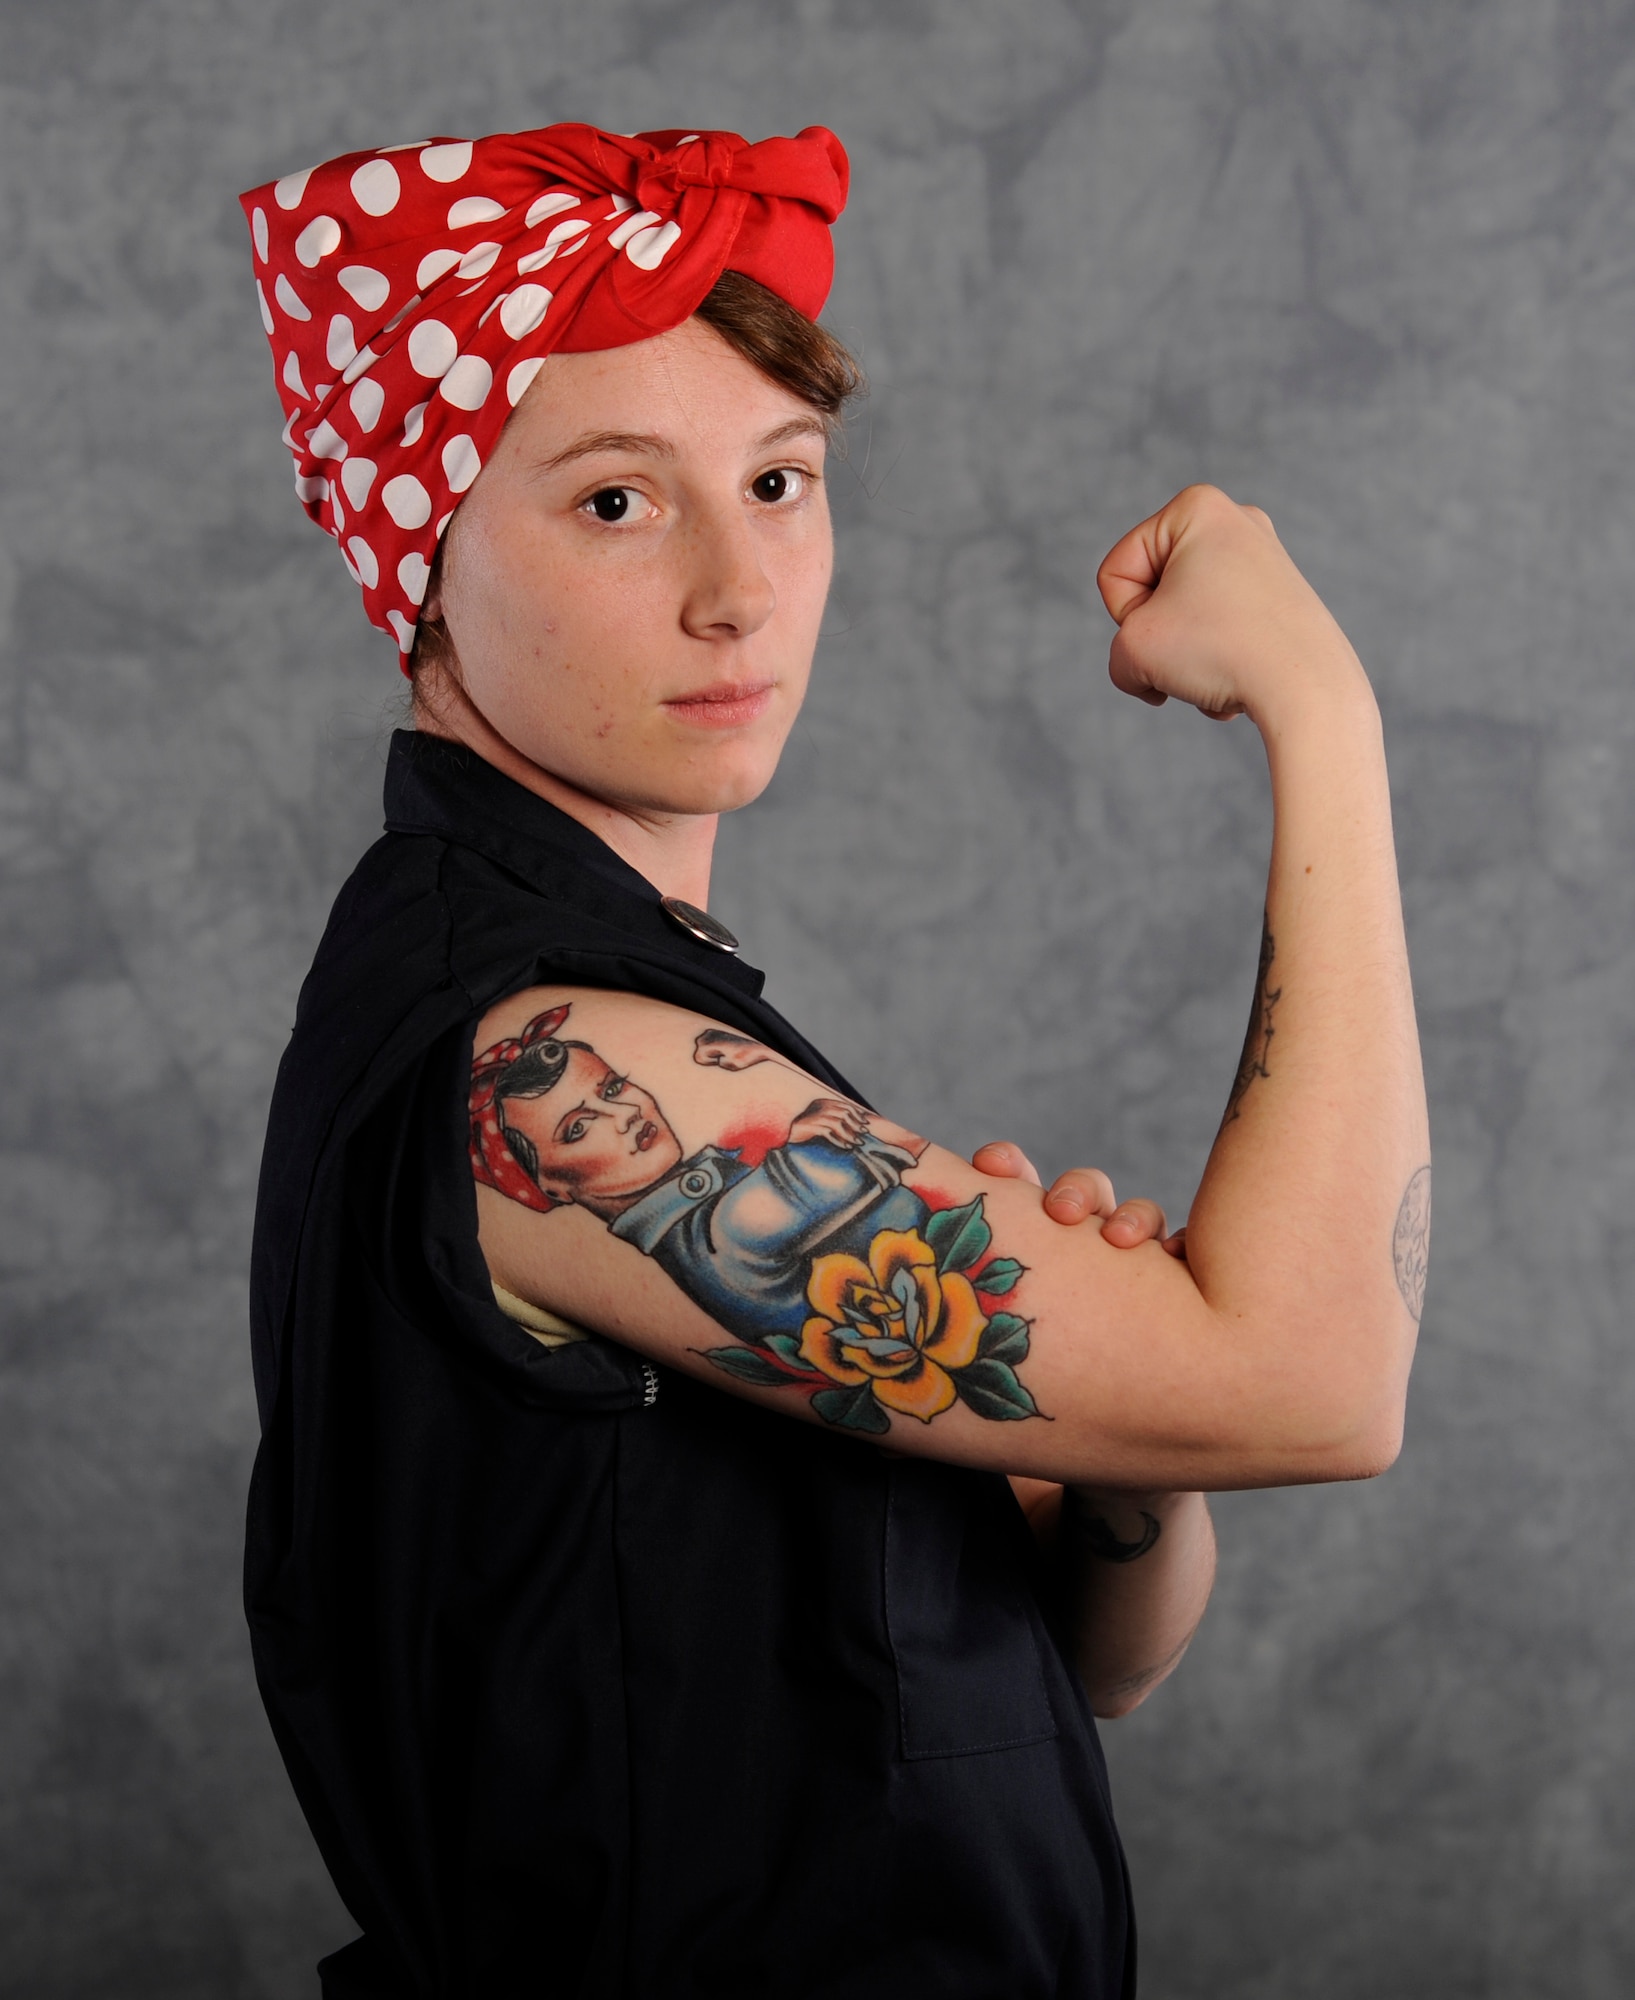 Staff Sgt. Alexandra M. Longfellow, 509th Bomb Wing Public Affairs photojournalist, displays a tattoo of “Rosie the Riveter” to showcase how she became who she is today. The history of “Rosie” shows that with dedication and effort, anyone can do anything. Many women opted to take on male-dominated trades to support their families while their husbands fought in World War II, an era in which they typically held positions as housewives. (U.S. Air Force photo by Staff Sgt. Alexandra M. Longfellow/Released)